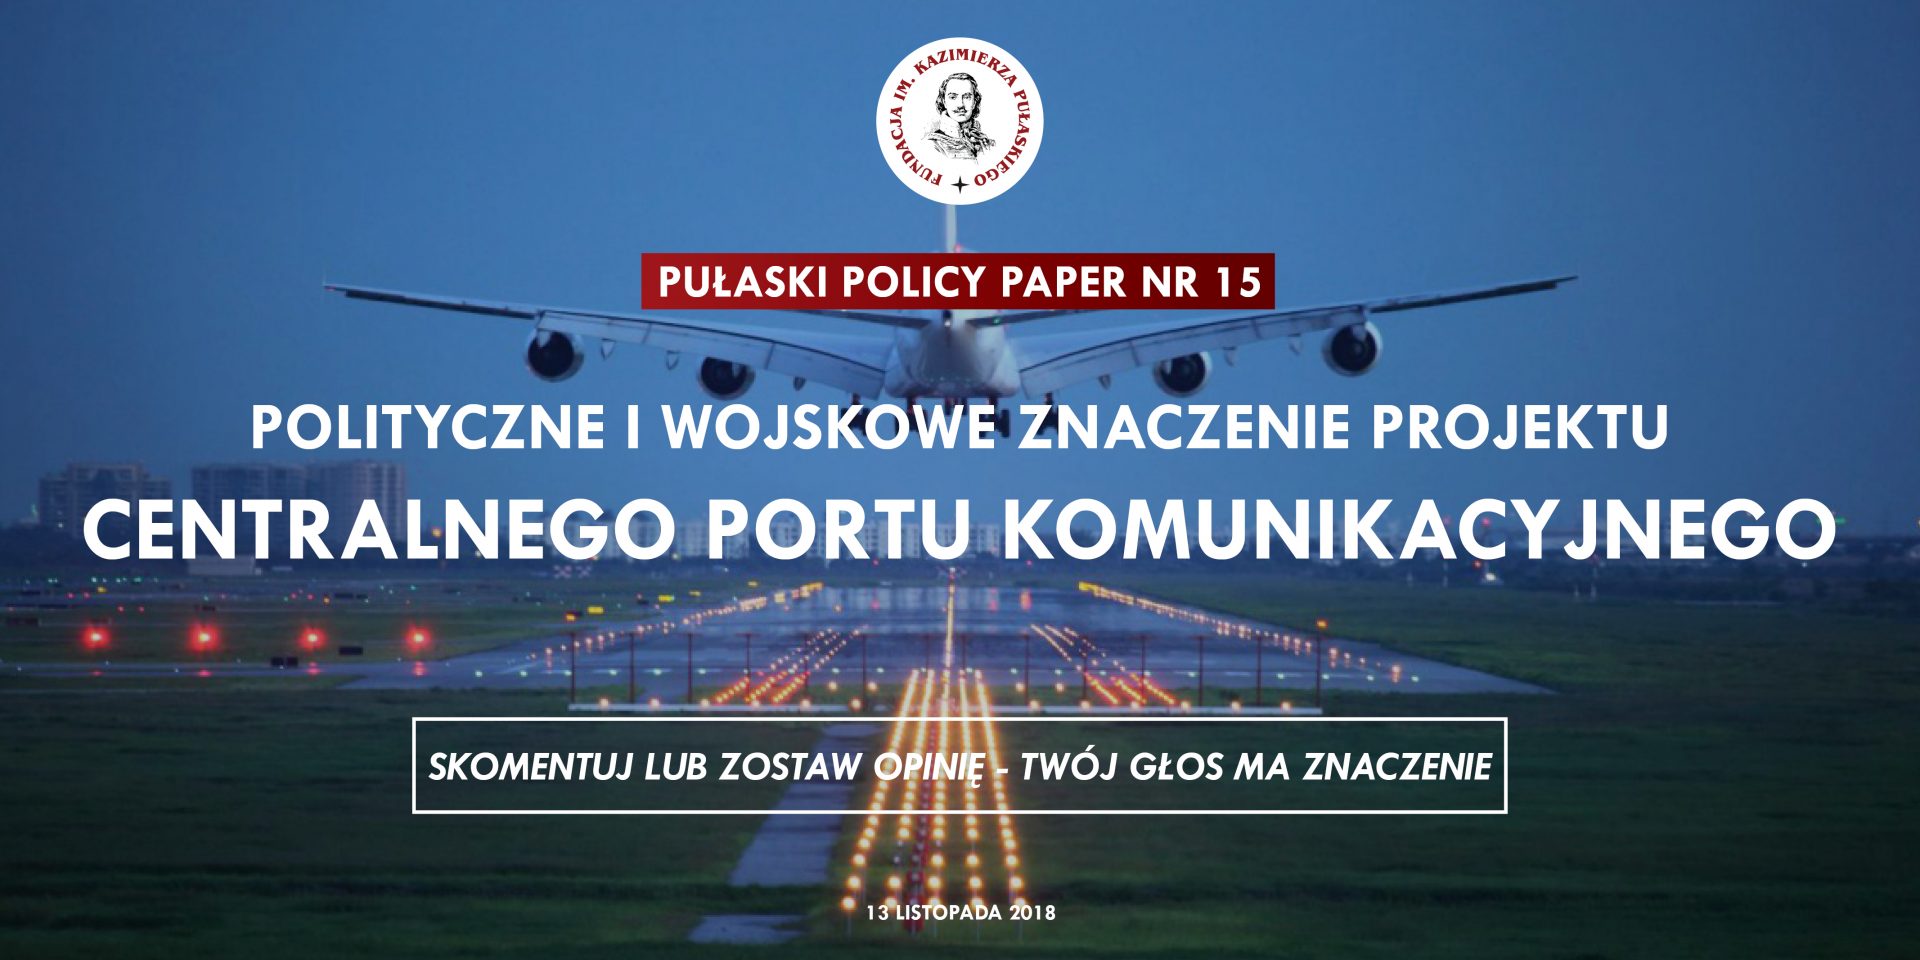 Political and military significance of the Central Transportation Hub project in Poland